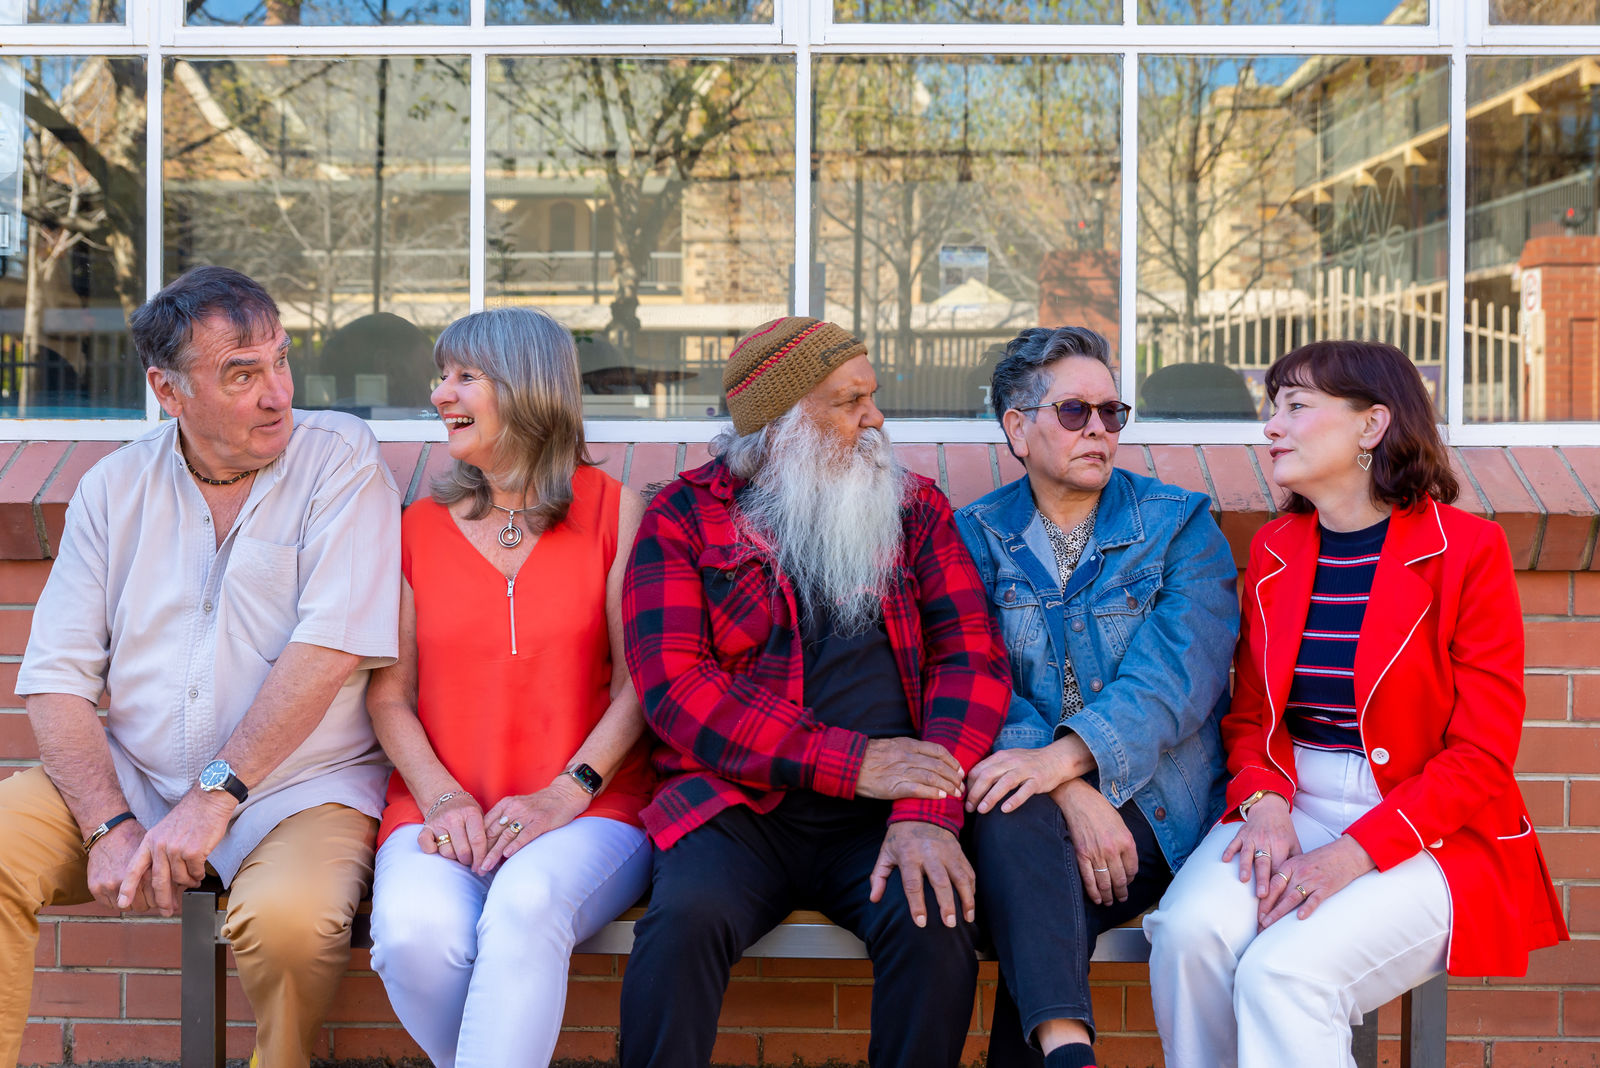 Older adults sit on a bench together